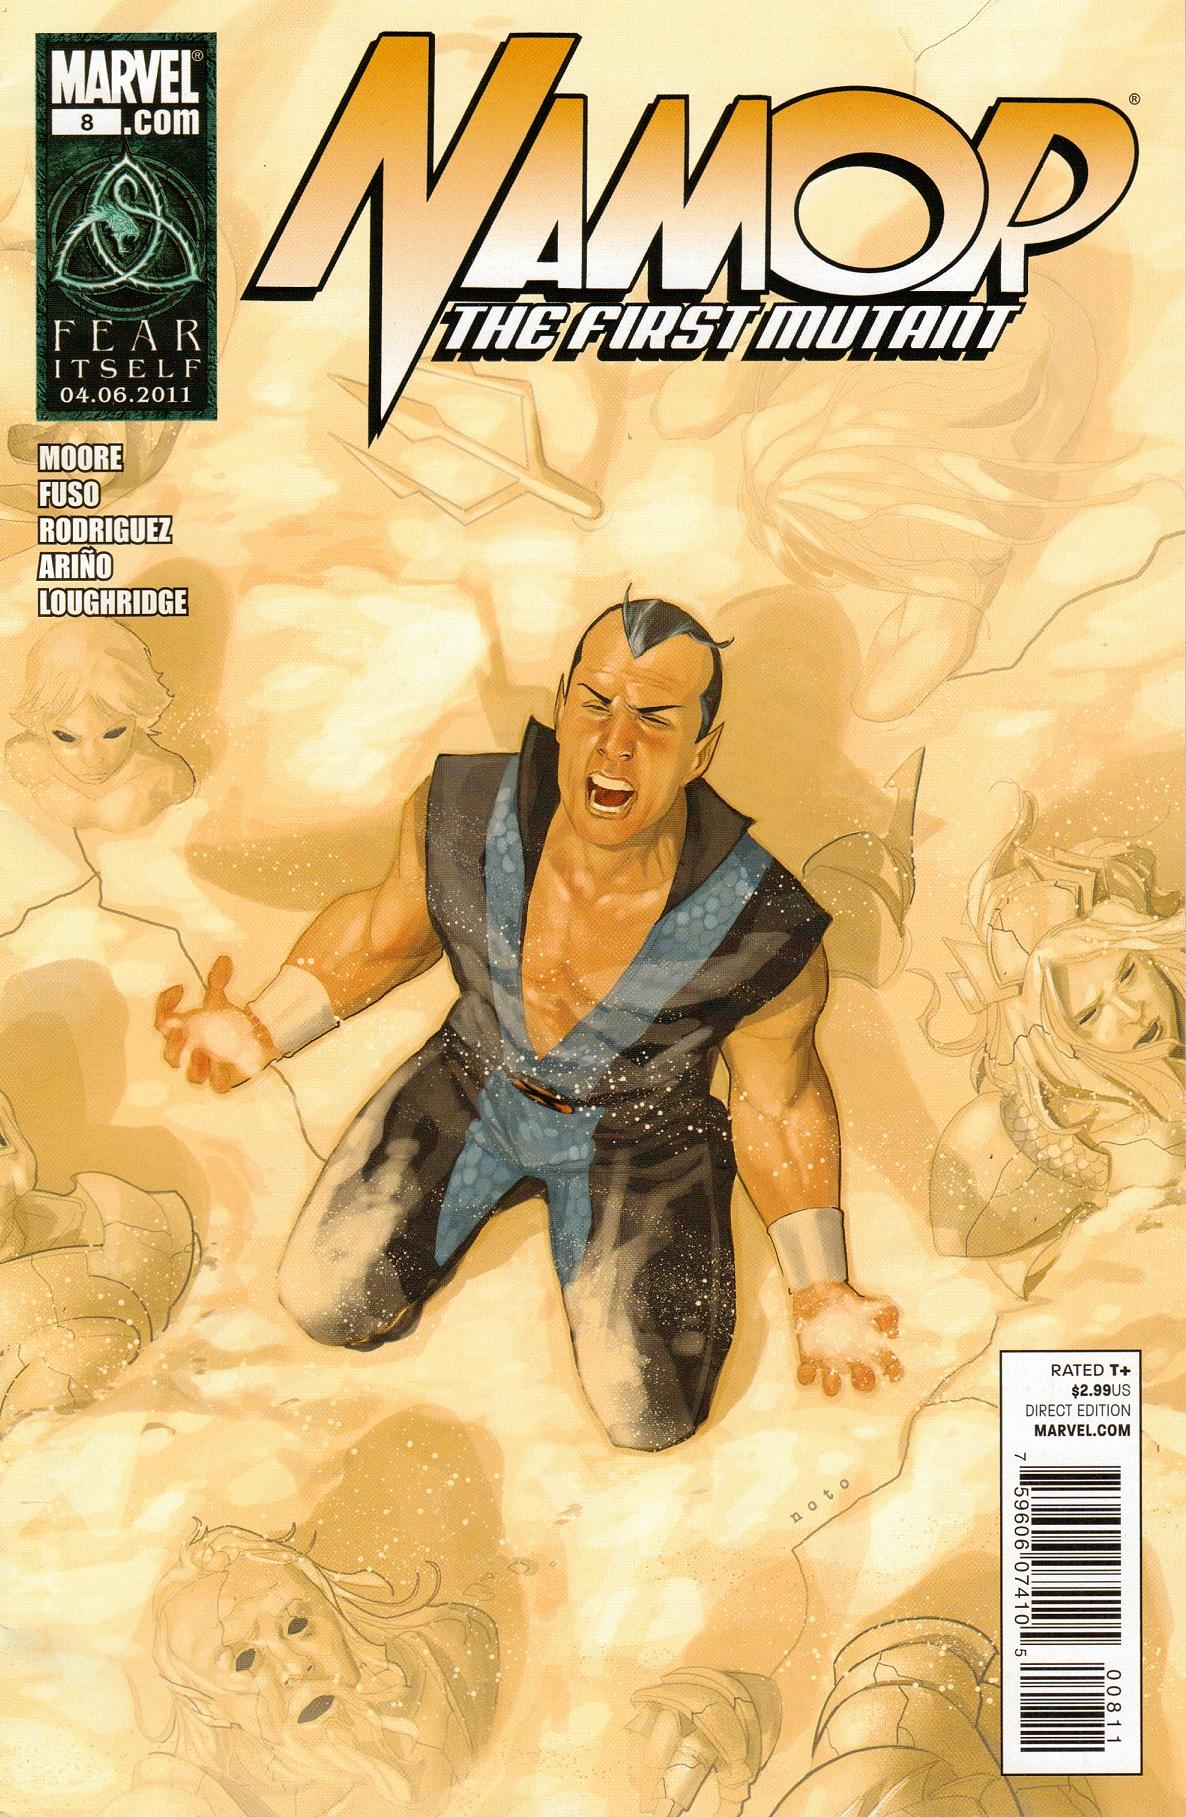 Namor: The First Mutant Vol. 1 #8